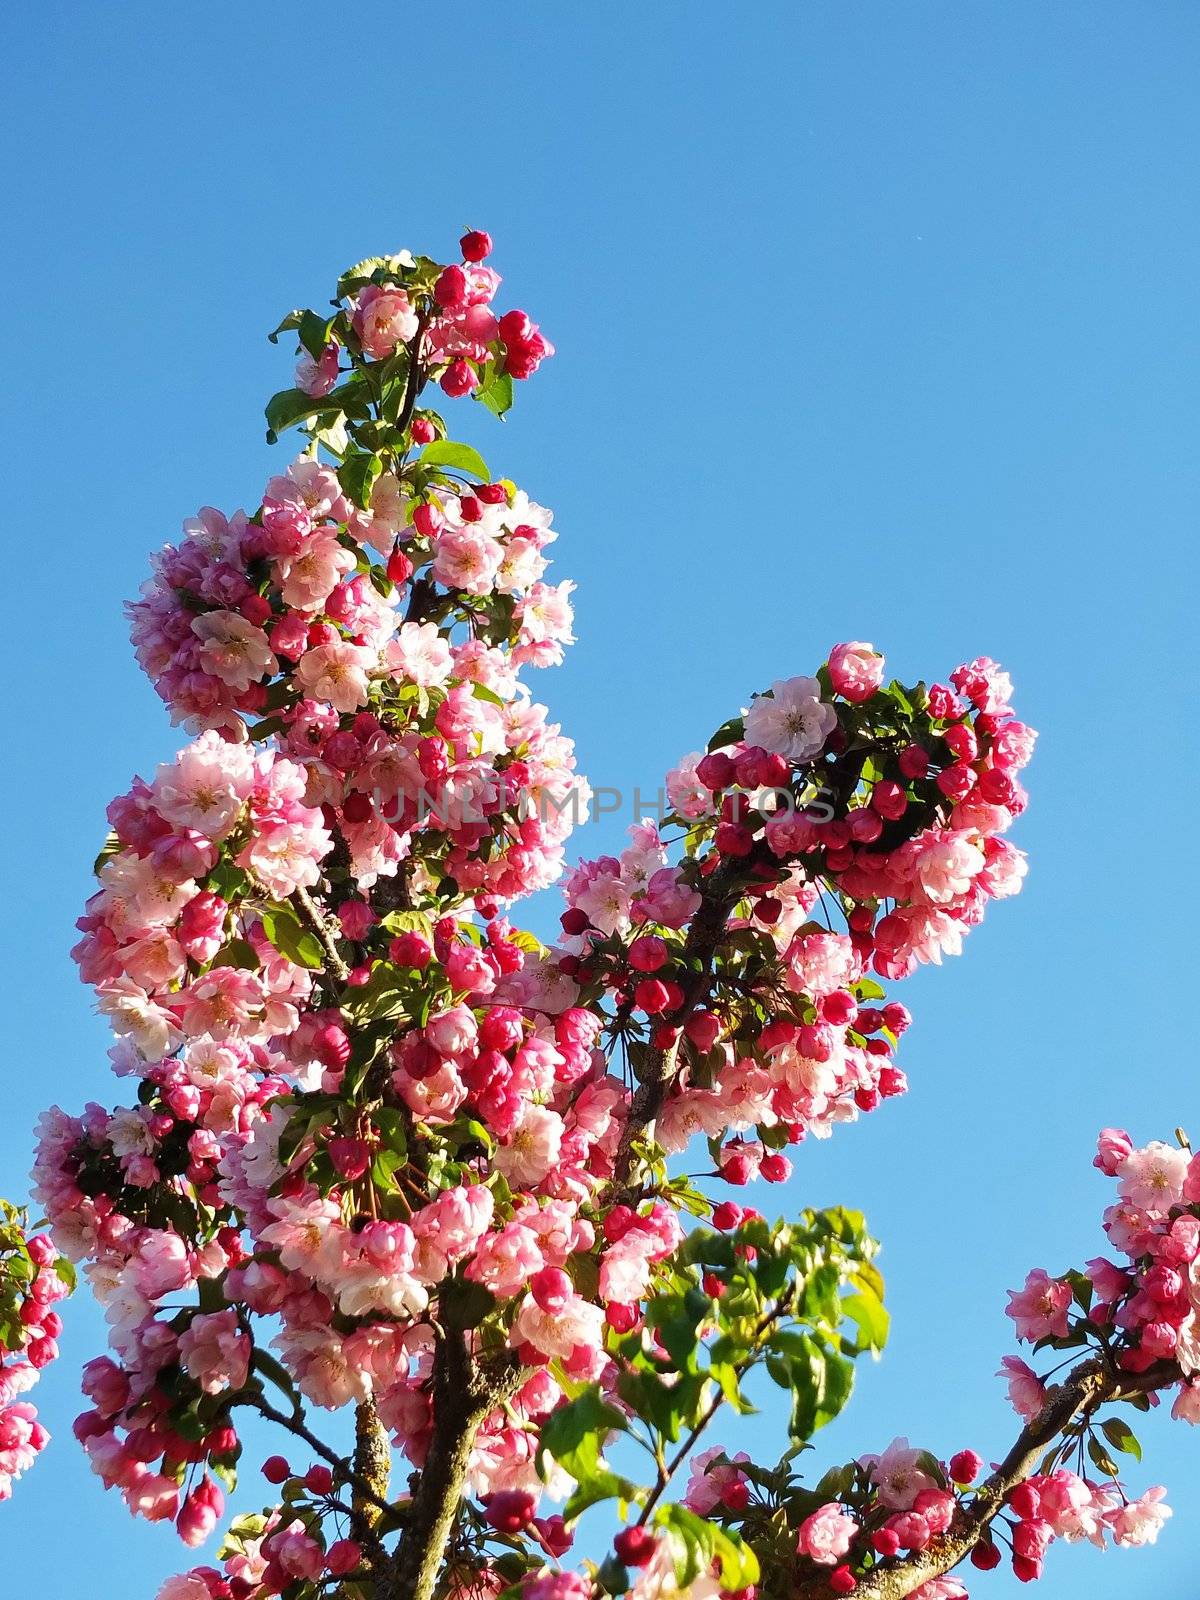 apple flowers and buds blooming at spring by yucas